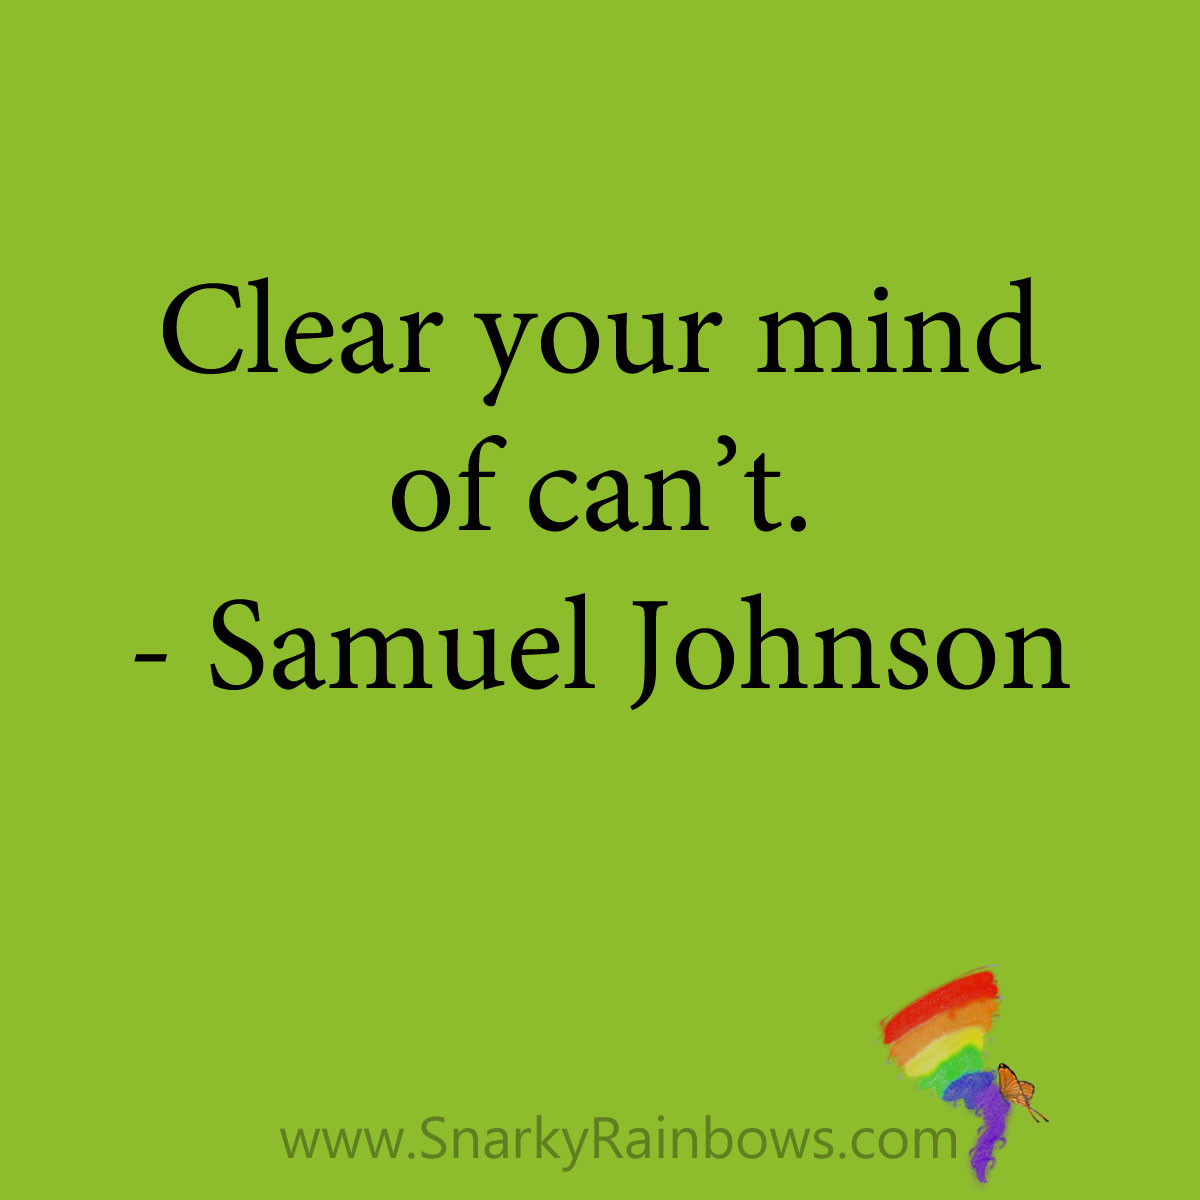 quote - samuel johnson - clear your mind